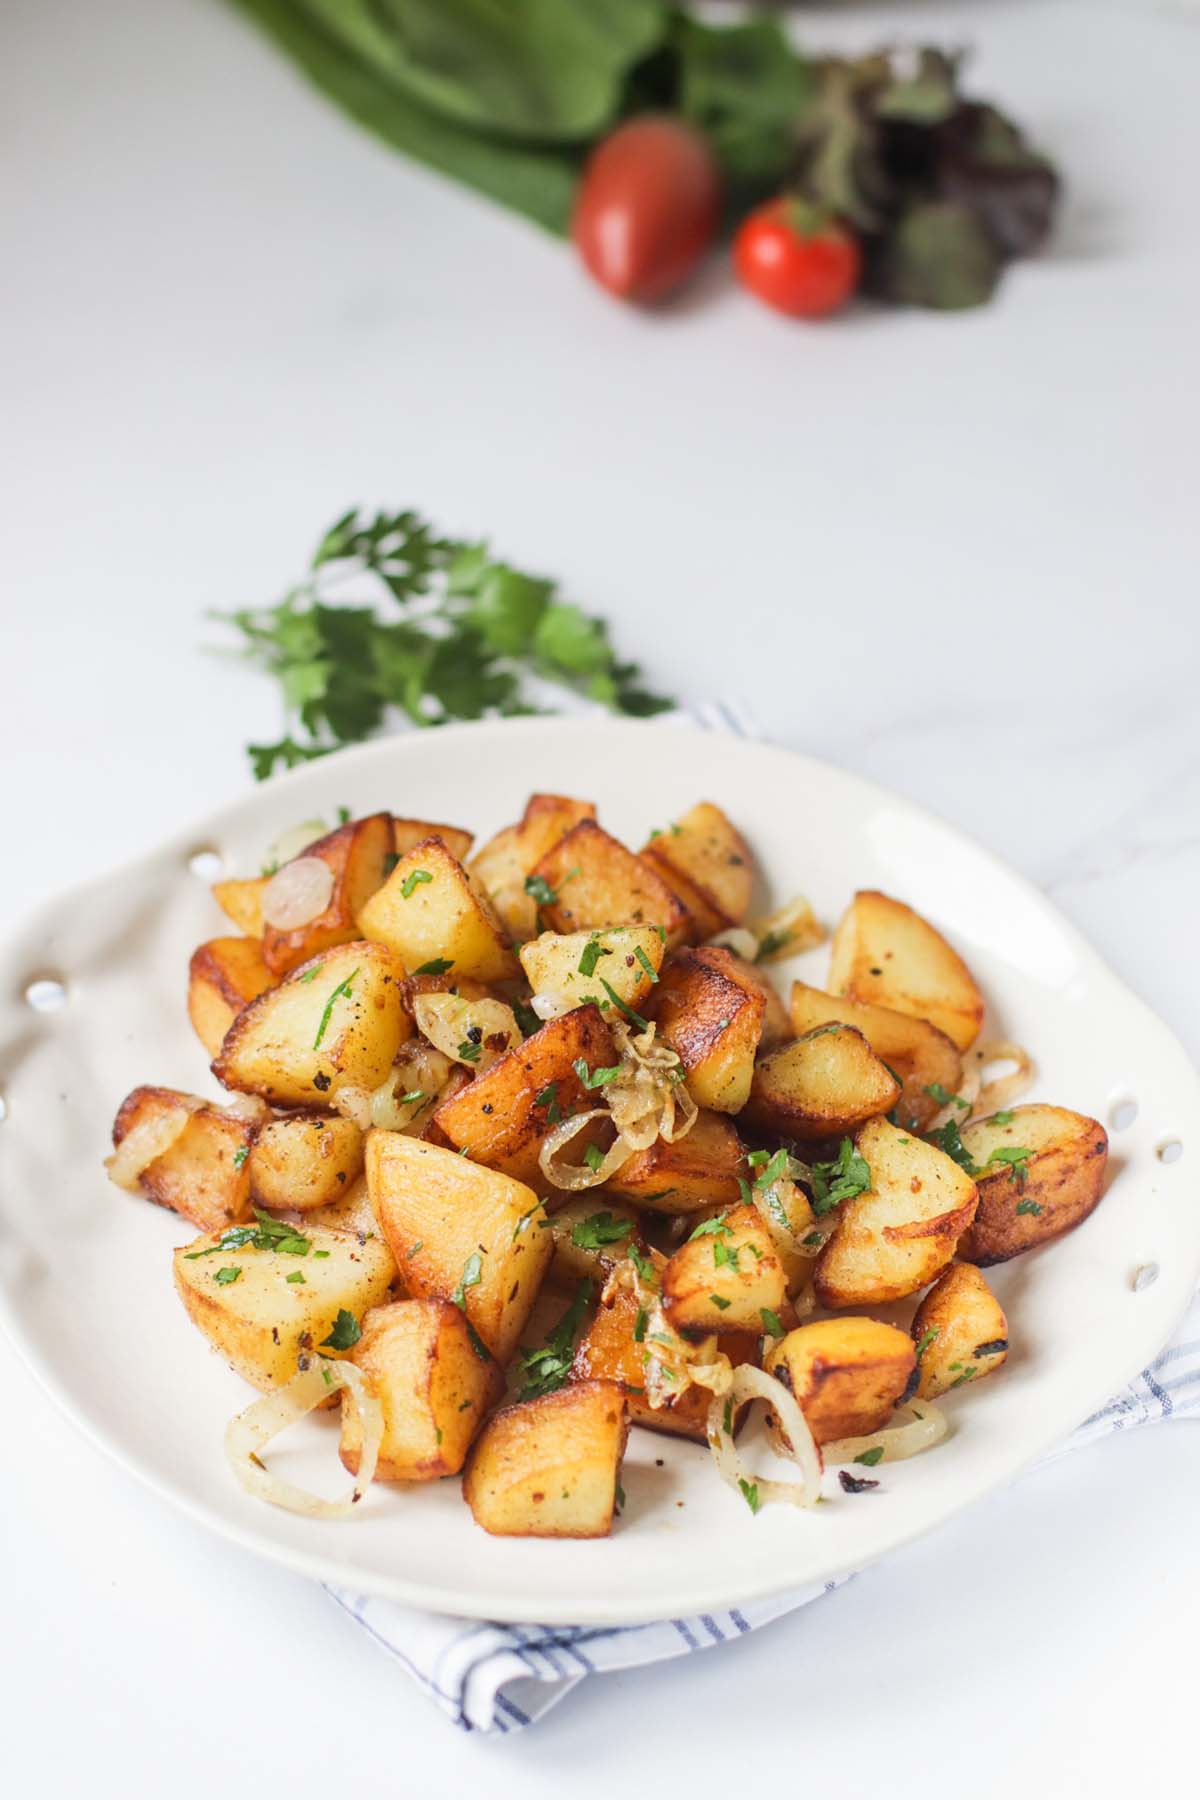 Fried potatoes on a plate that is set on a kitchen towel.